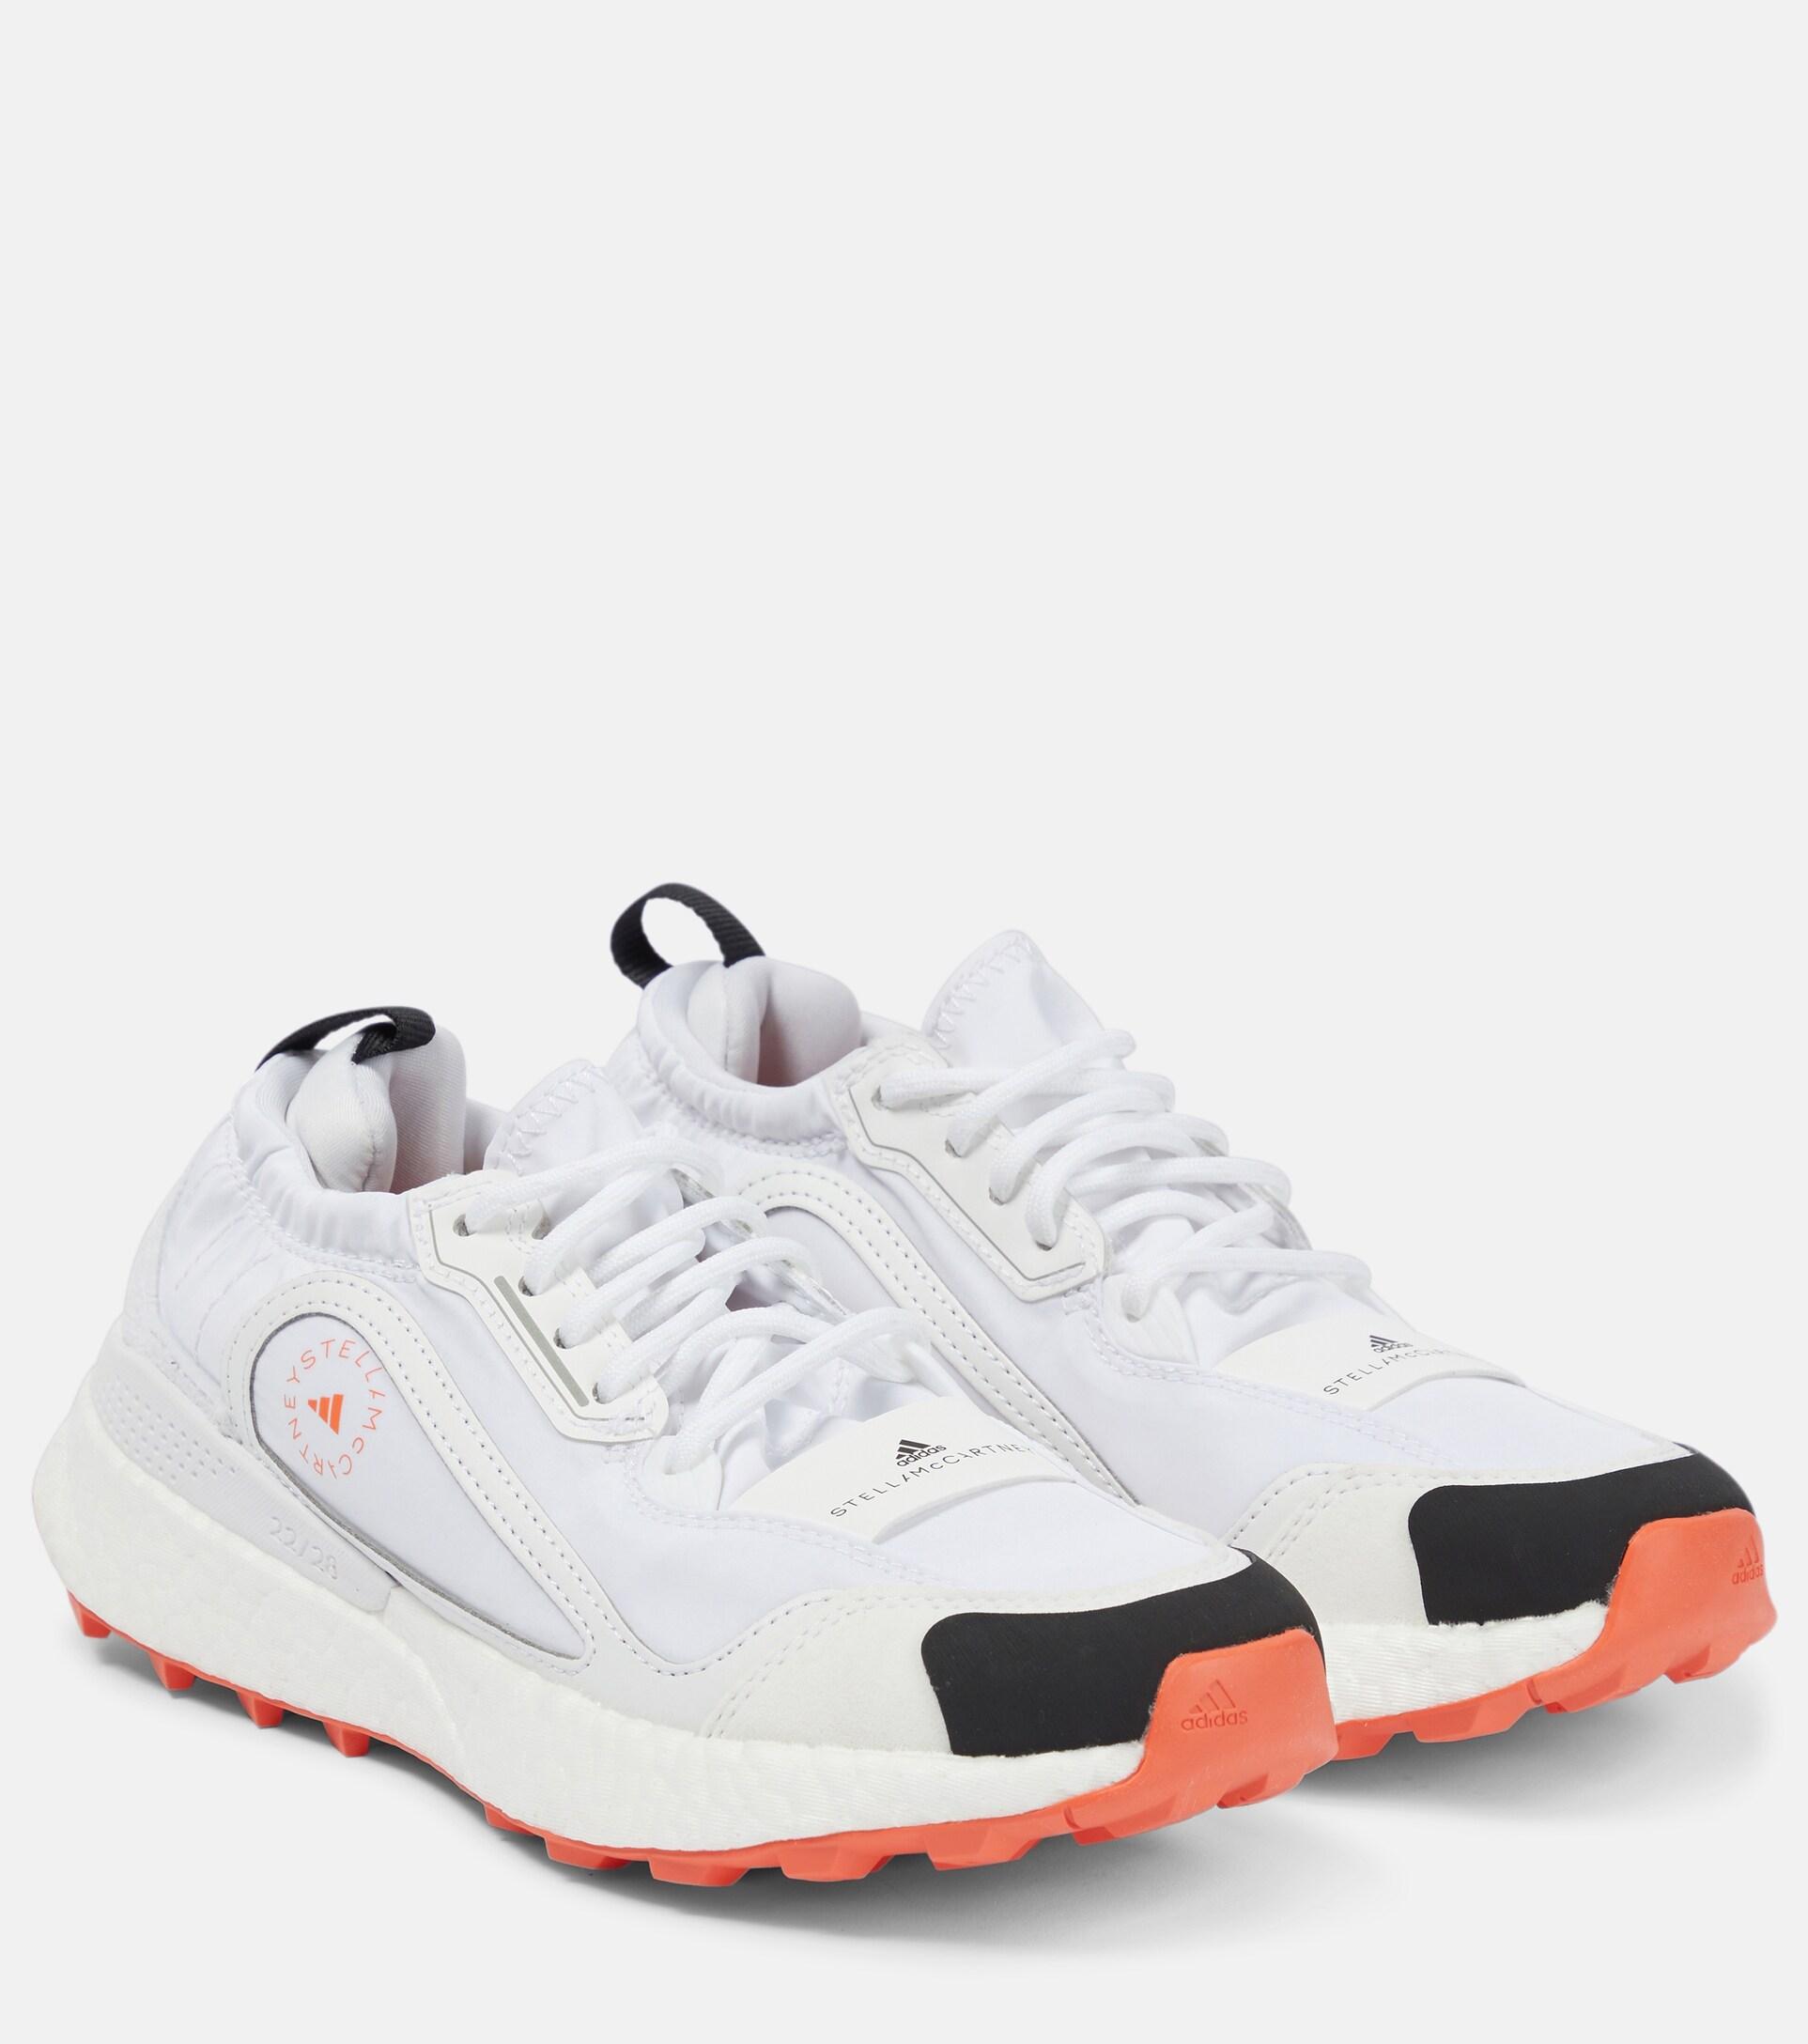 adidas By Stella McCartney Outdoorboost 2.0 Sneakers in White | Lyst